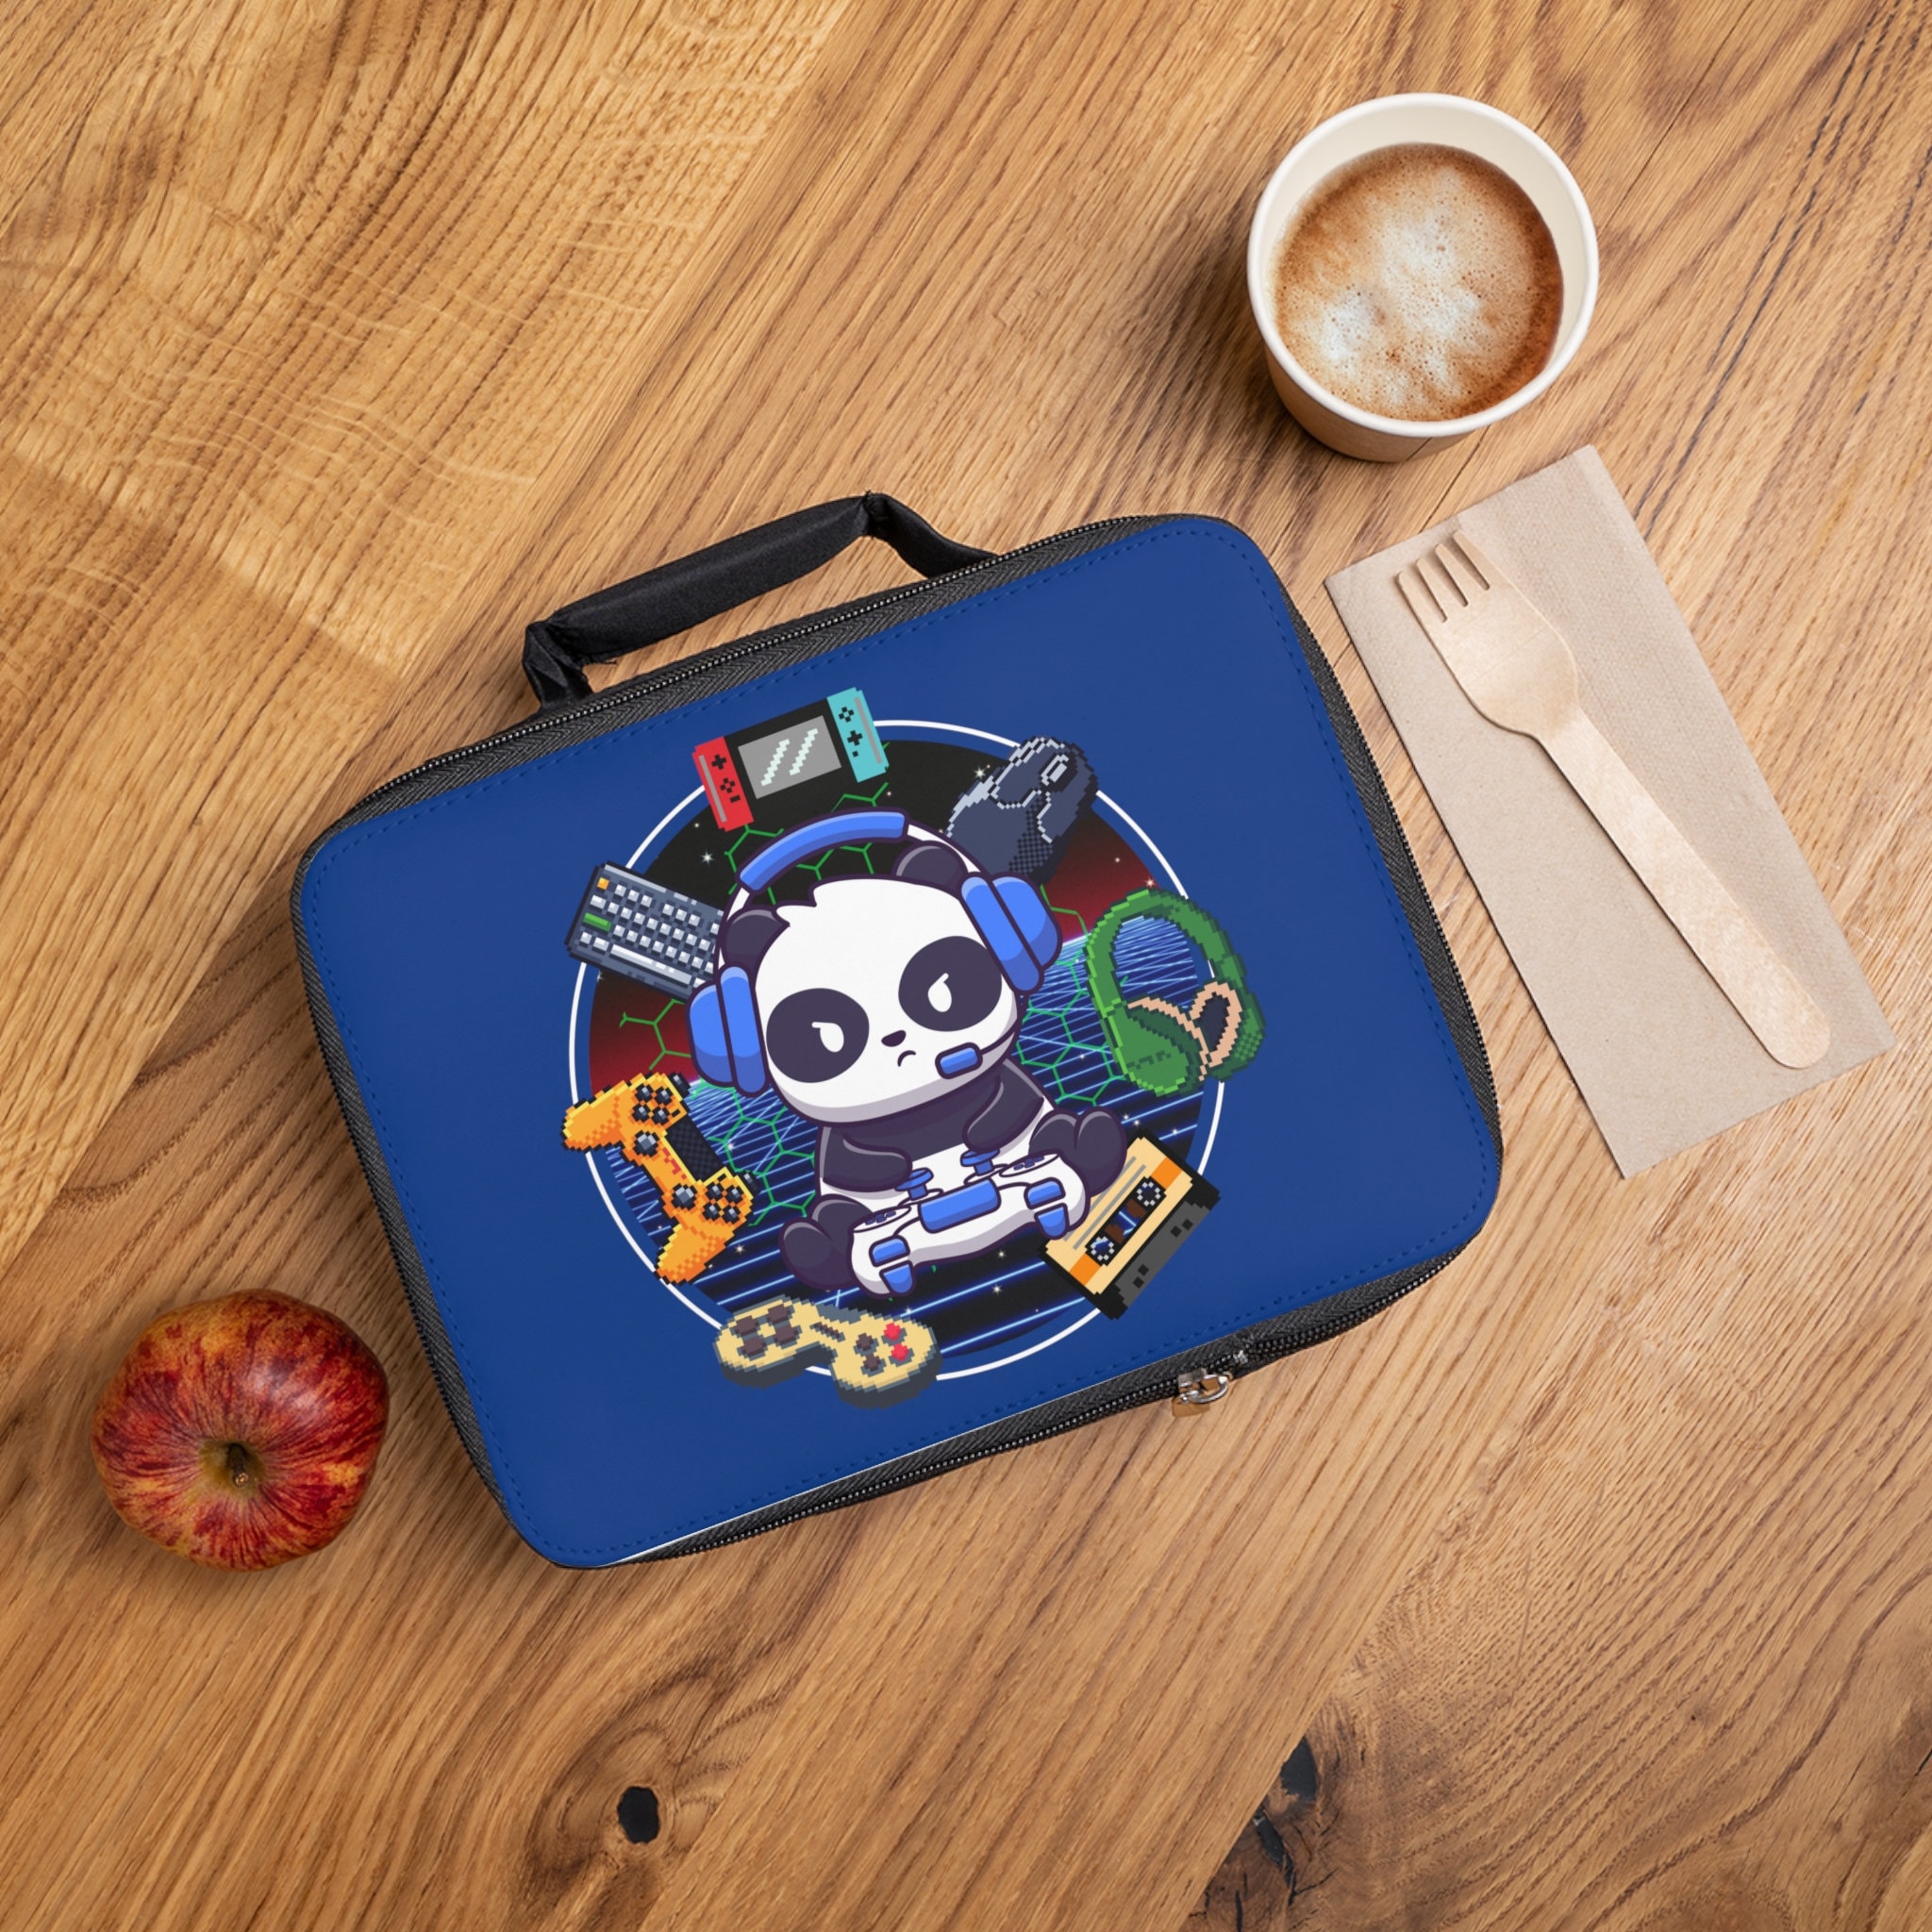 TILYTADLY Lunch Box for Boys, Boys Lunch Bag for Gamer，Reusable Video Game  Lunch Boxes for Boy Girls…See more TILYTADLY Lunch Box for Boys, Boys Lunch